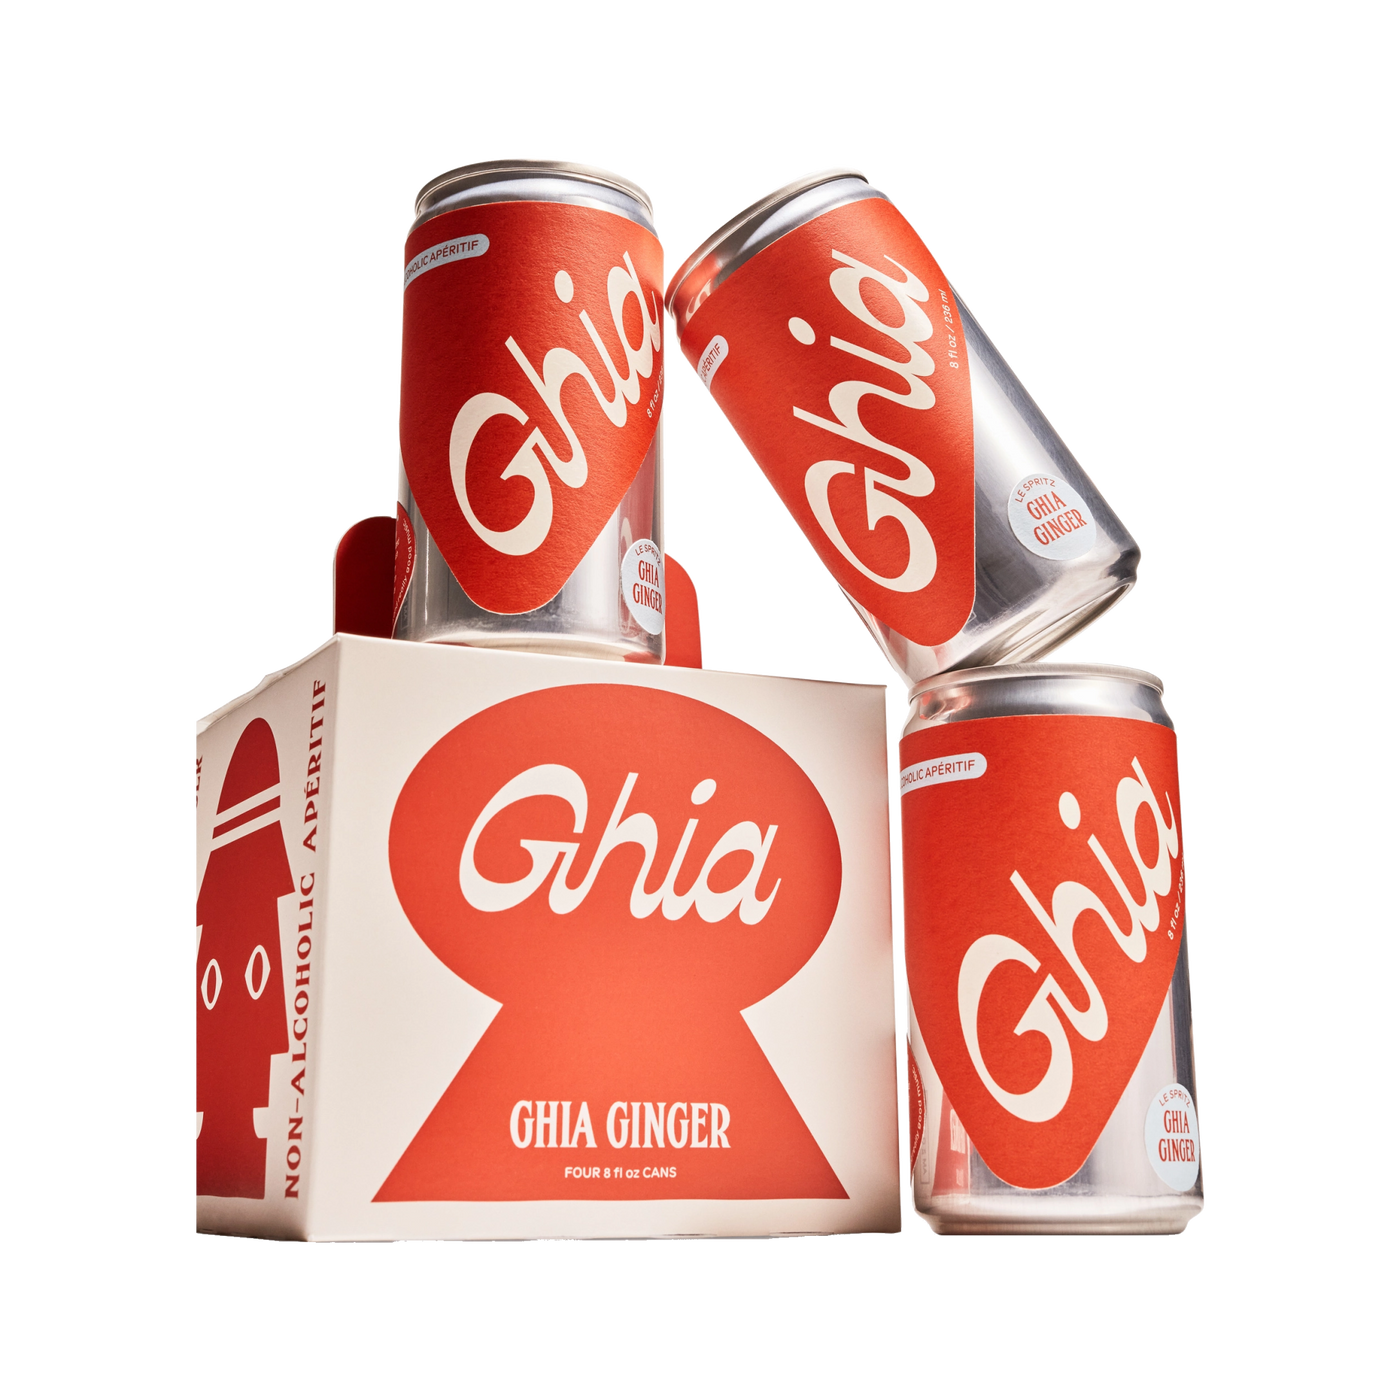 Vegan, gluten free, nothing artificial Ghia Le Spritz Ginger Non-Alcoholic Spritz available at The Sobr Market in Winnipeg Canada with Free shipping and delivery